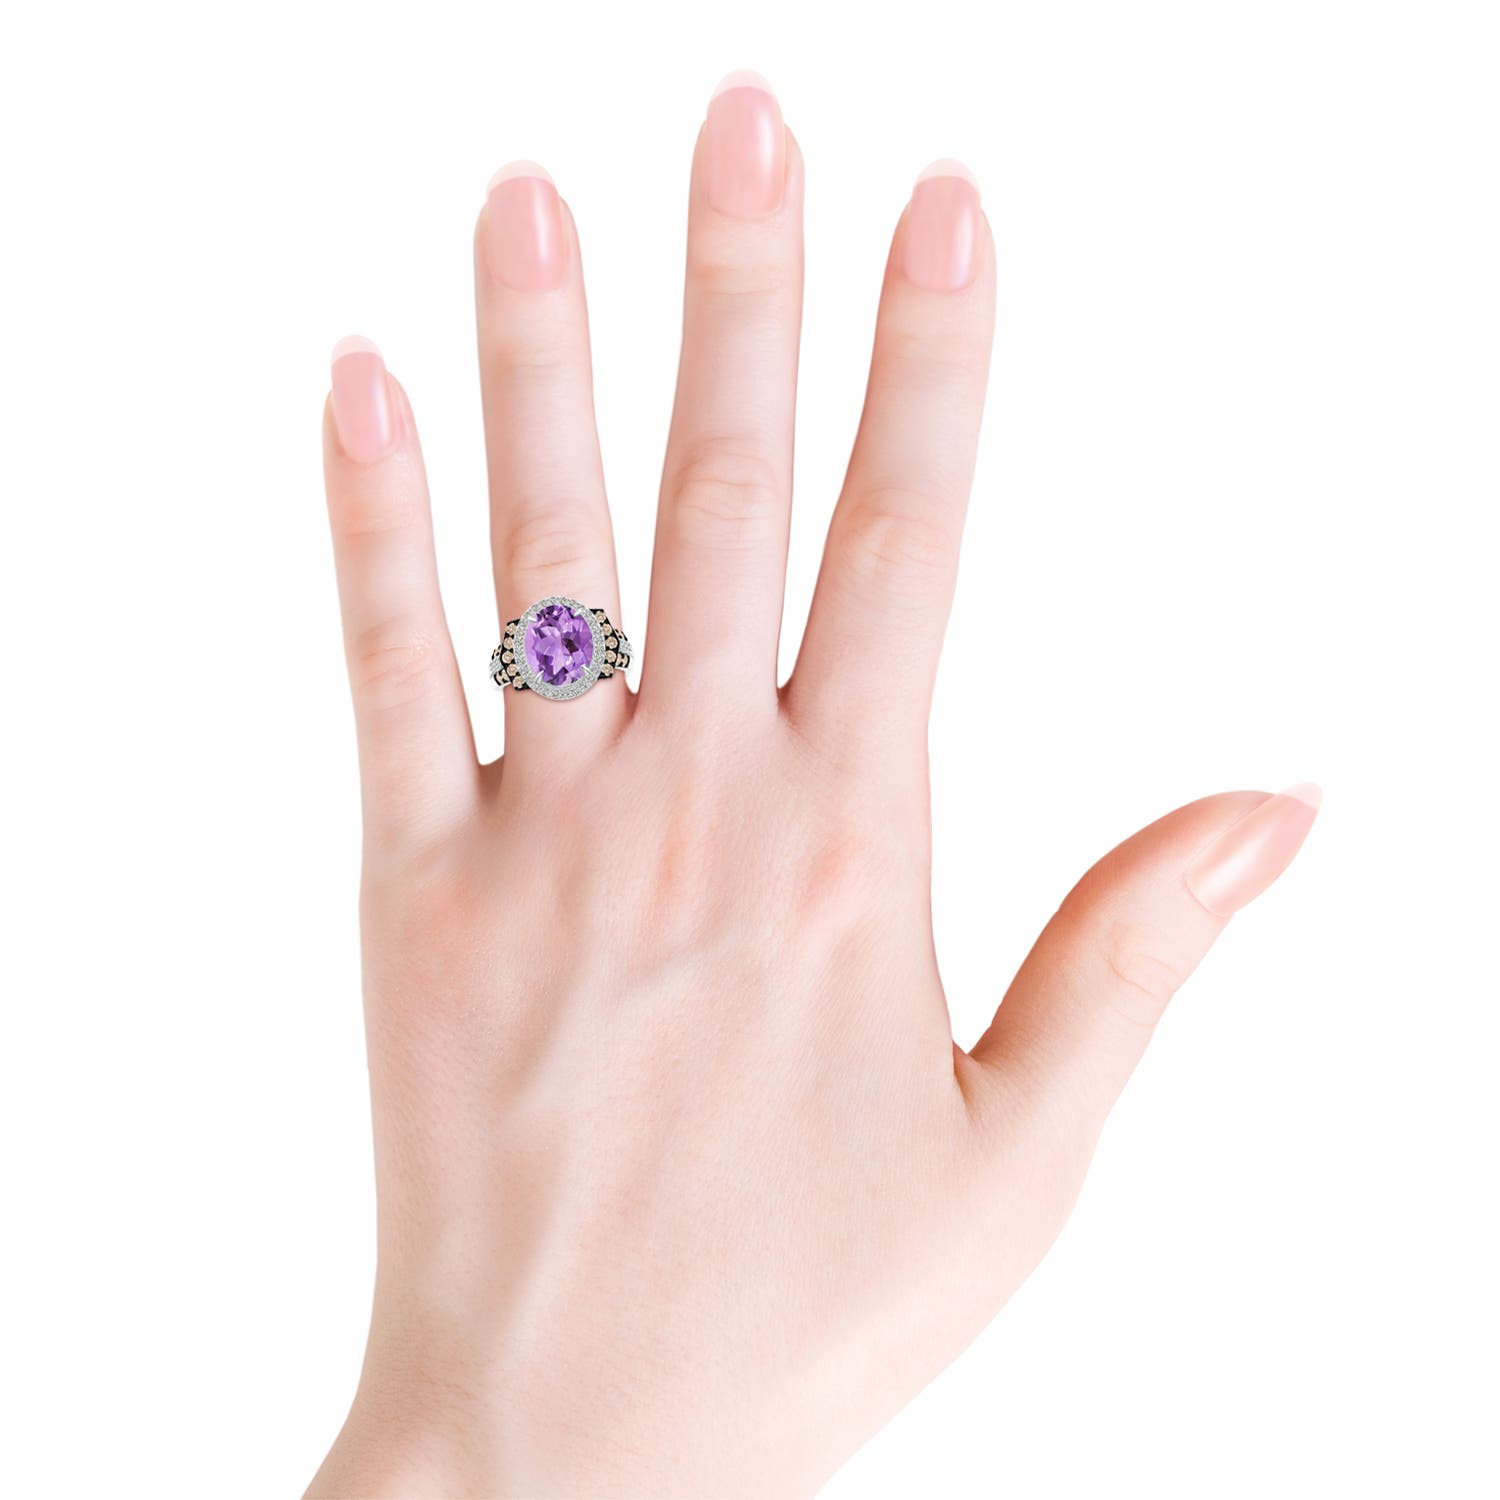 A - Amethyst / 3.8 CT / 14 KT White Gold